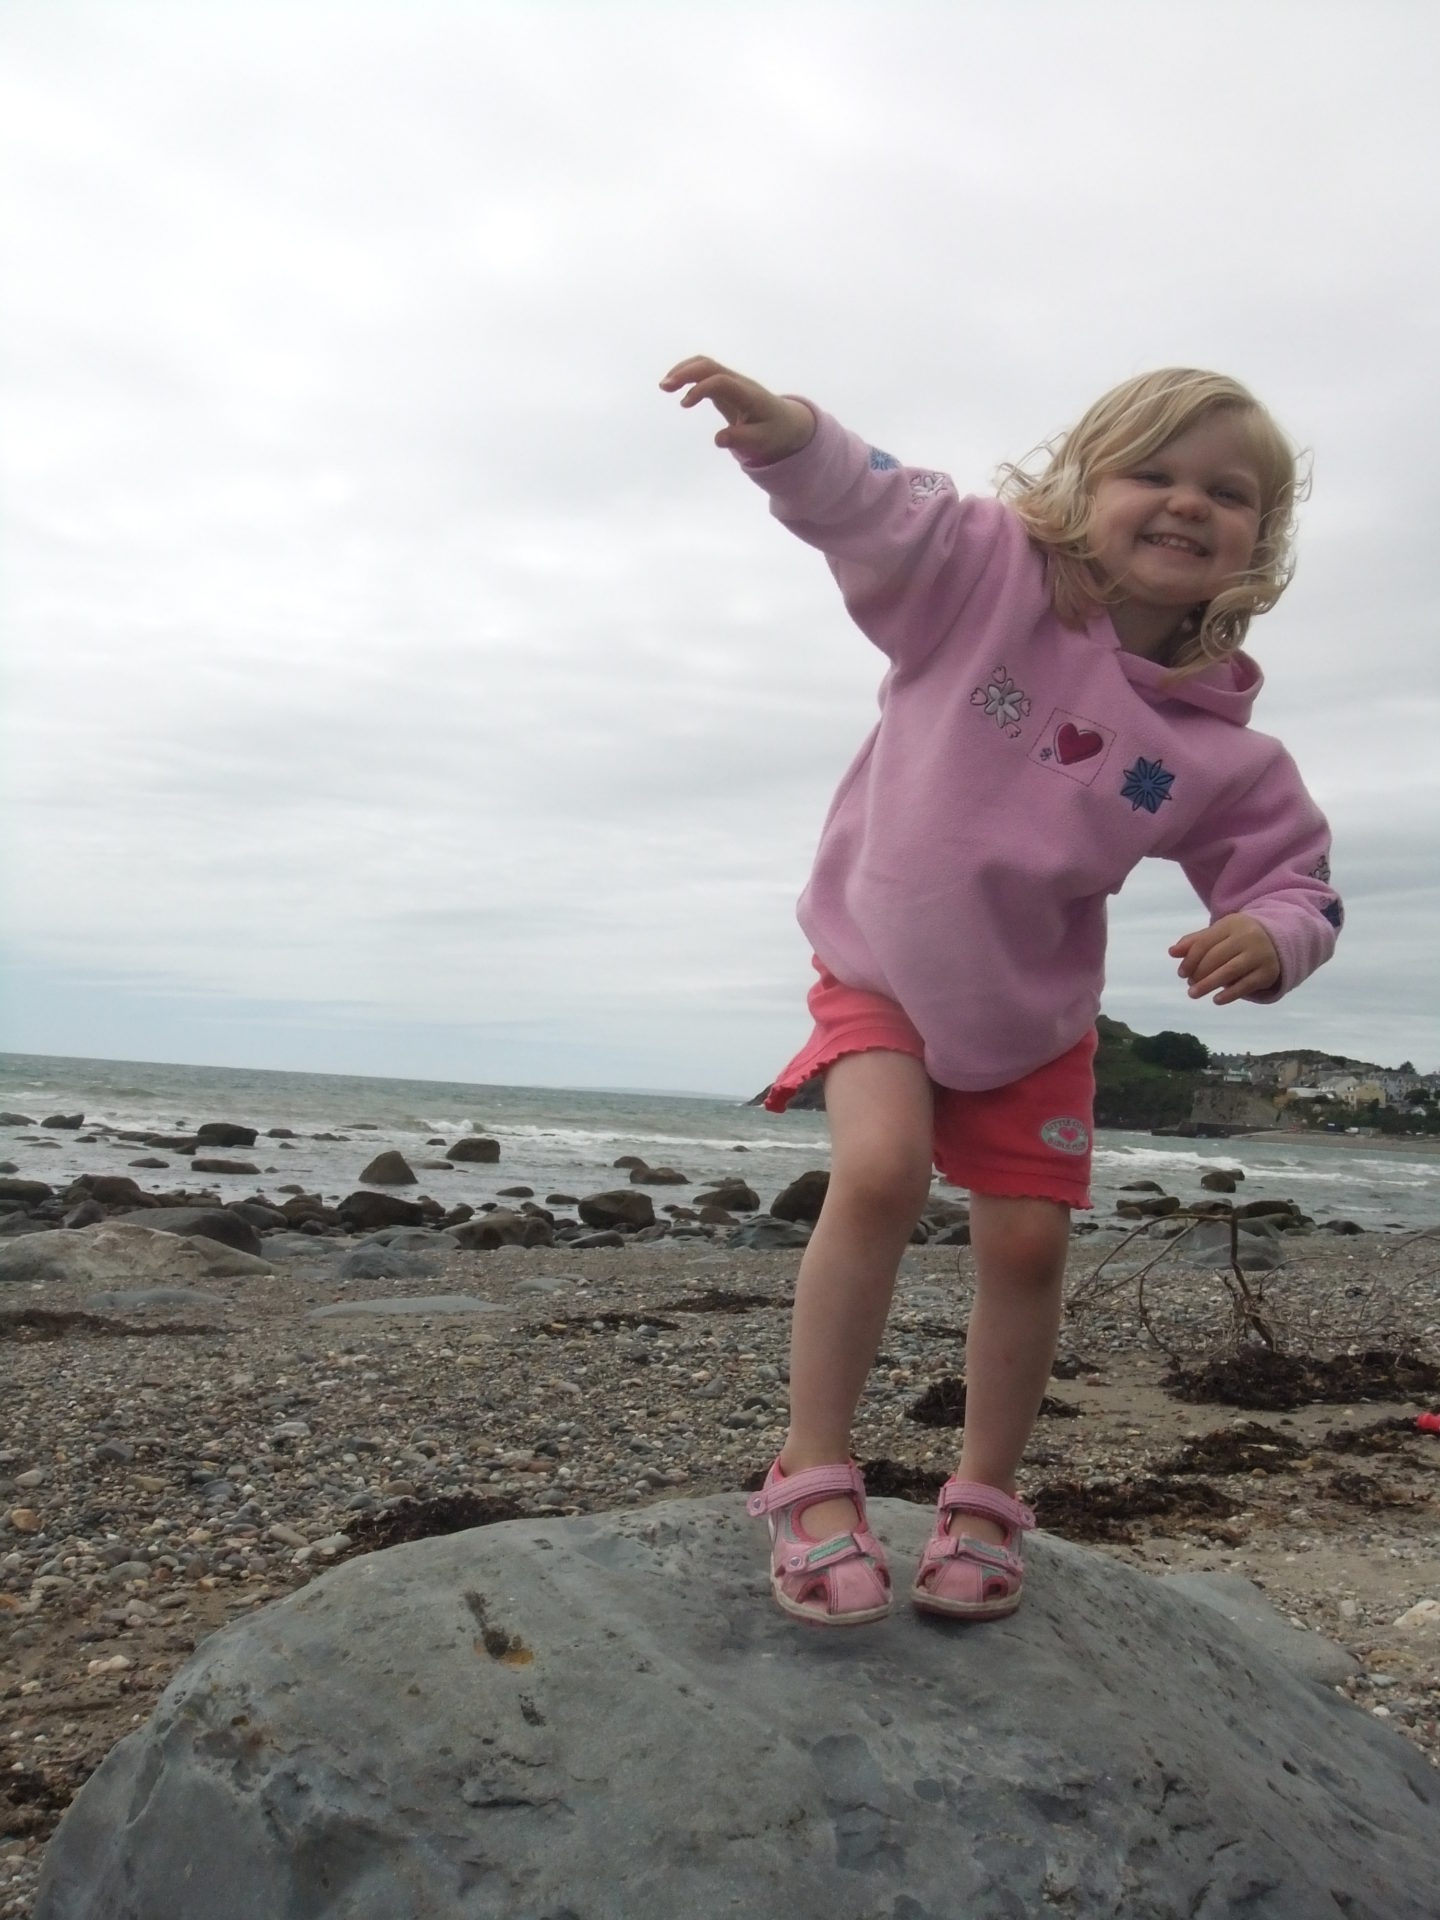 Rockpooling is fun, but so is dancing on giant rocks